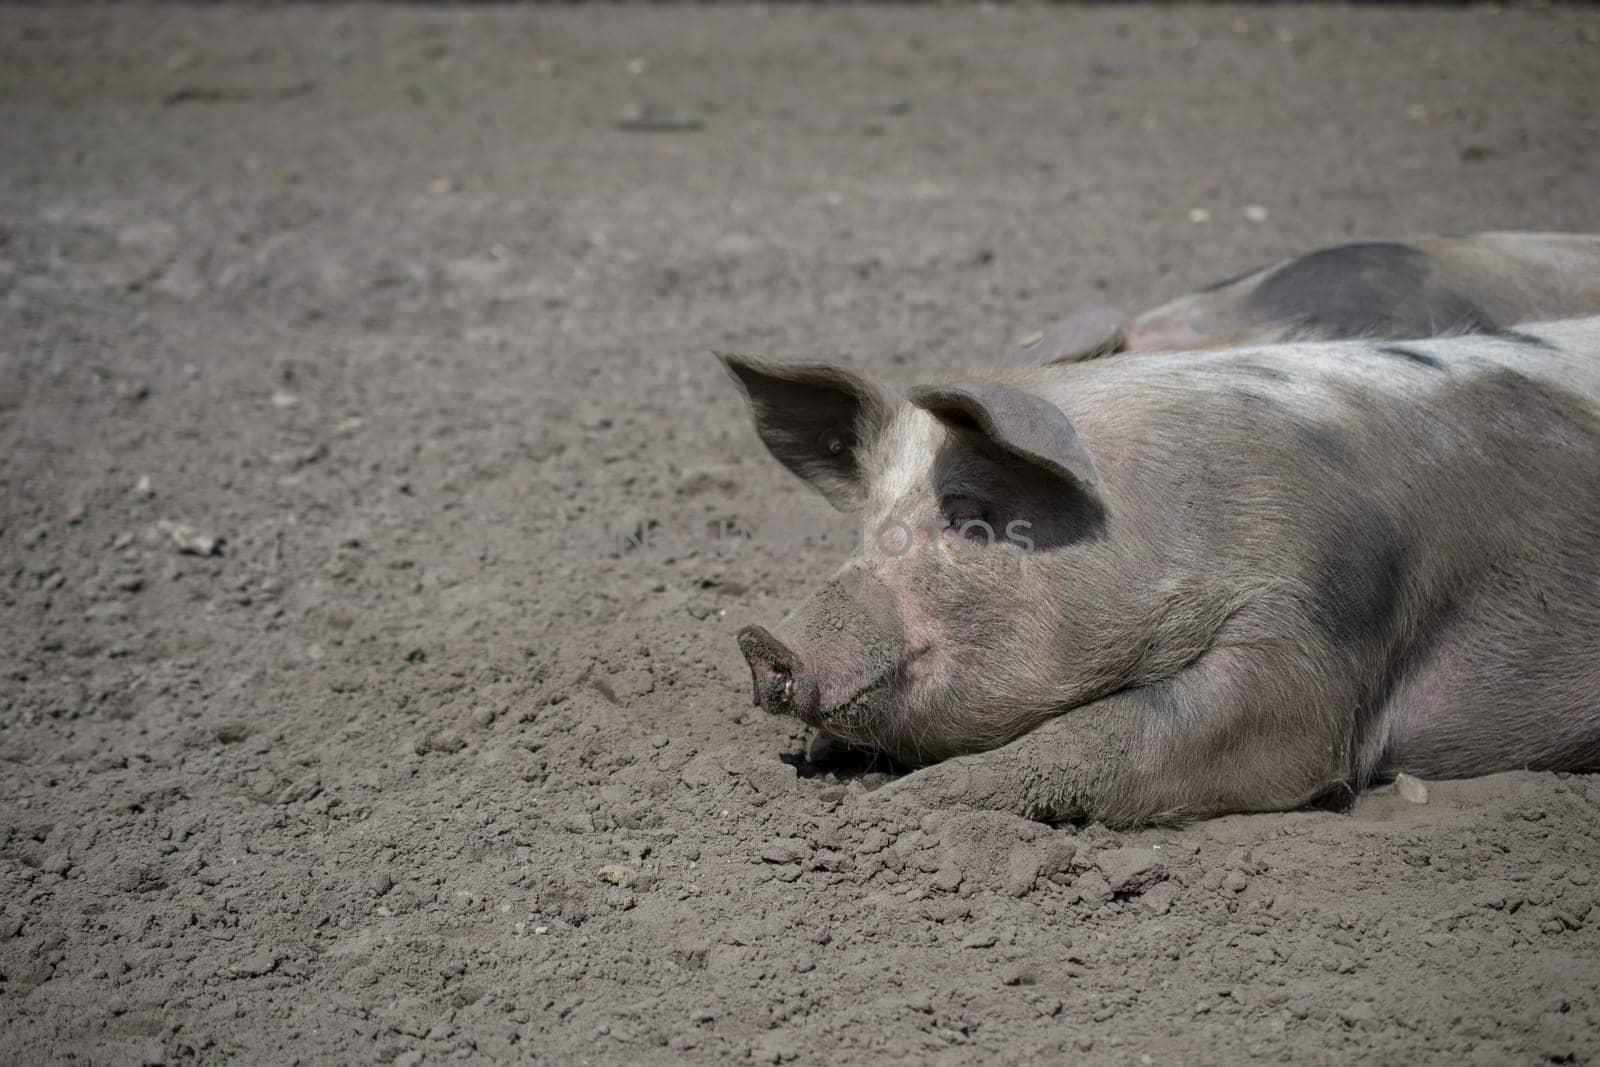 Domestic pig wallowing in the mud. High quality photo